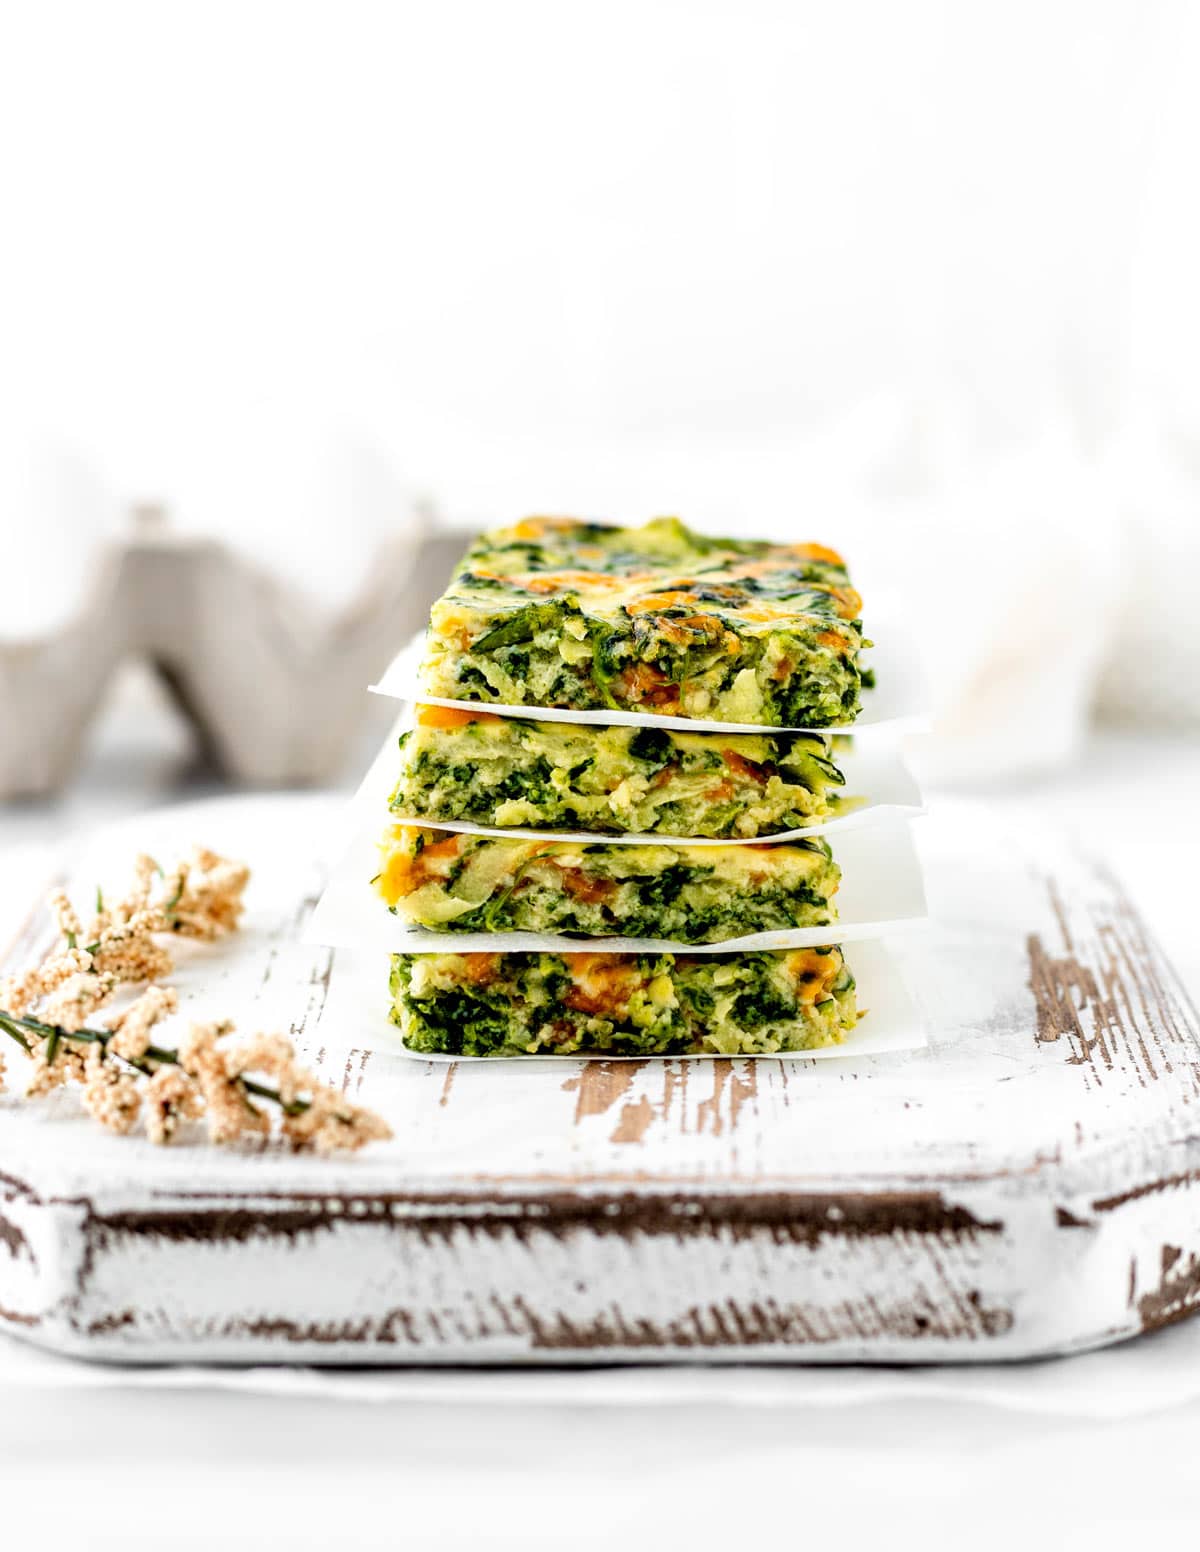 Four slices of the veggie frittata fingers stacked.